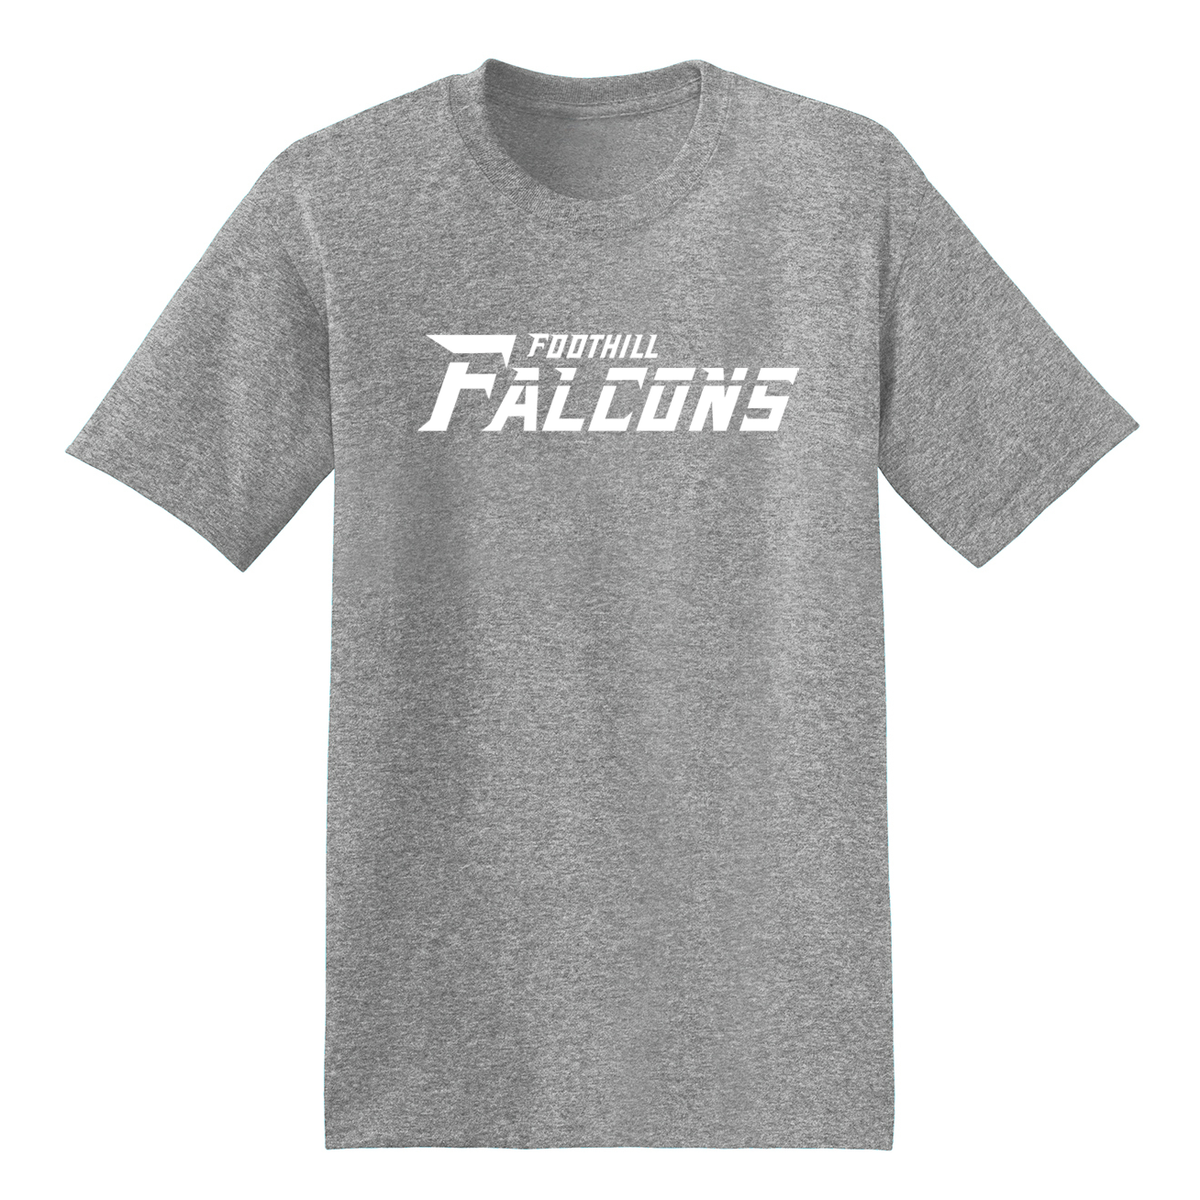 Foothill Falcons T-Shirt